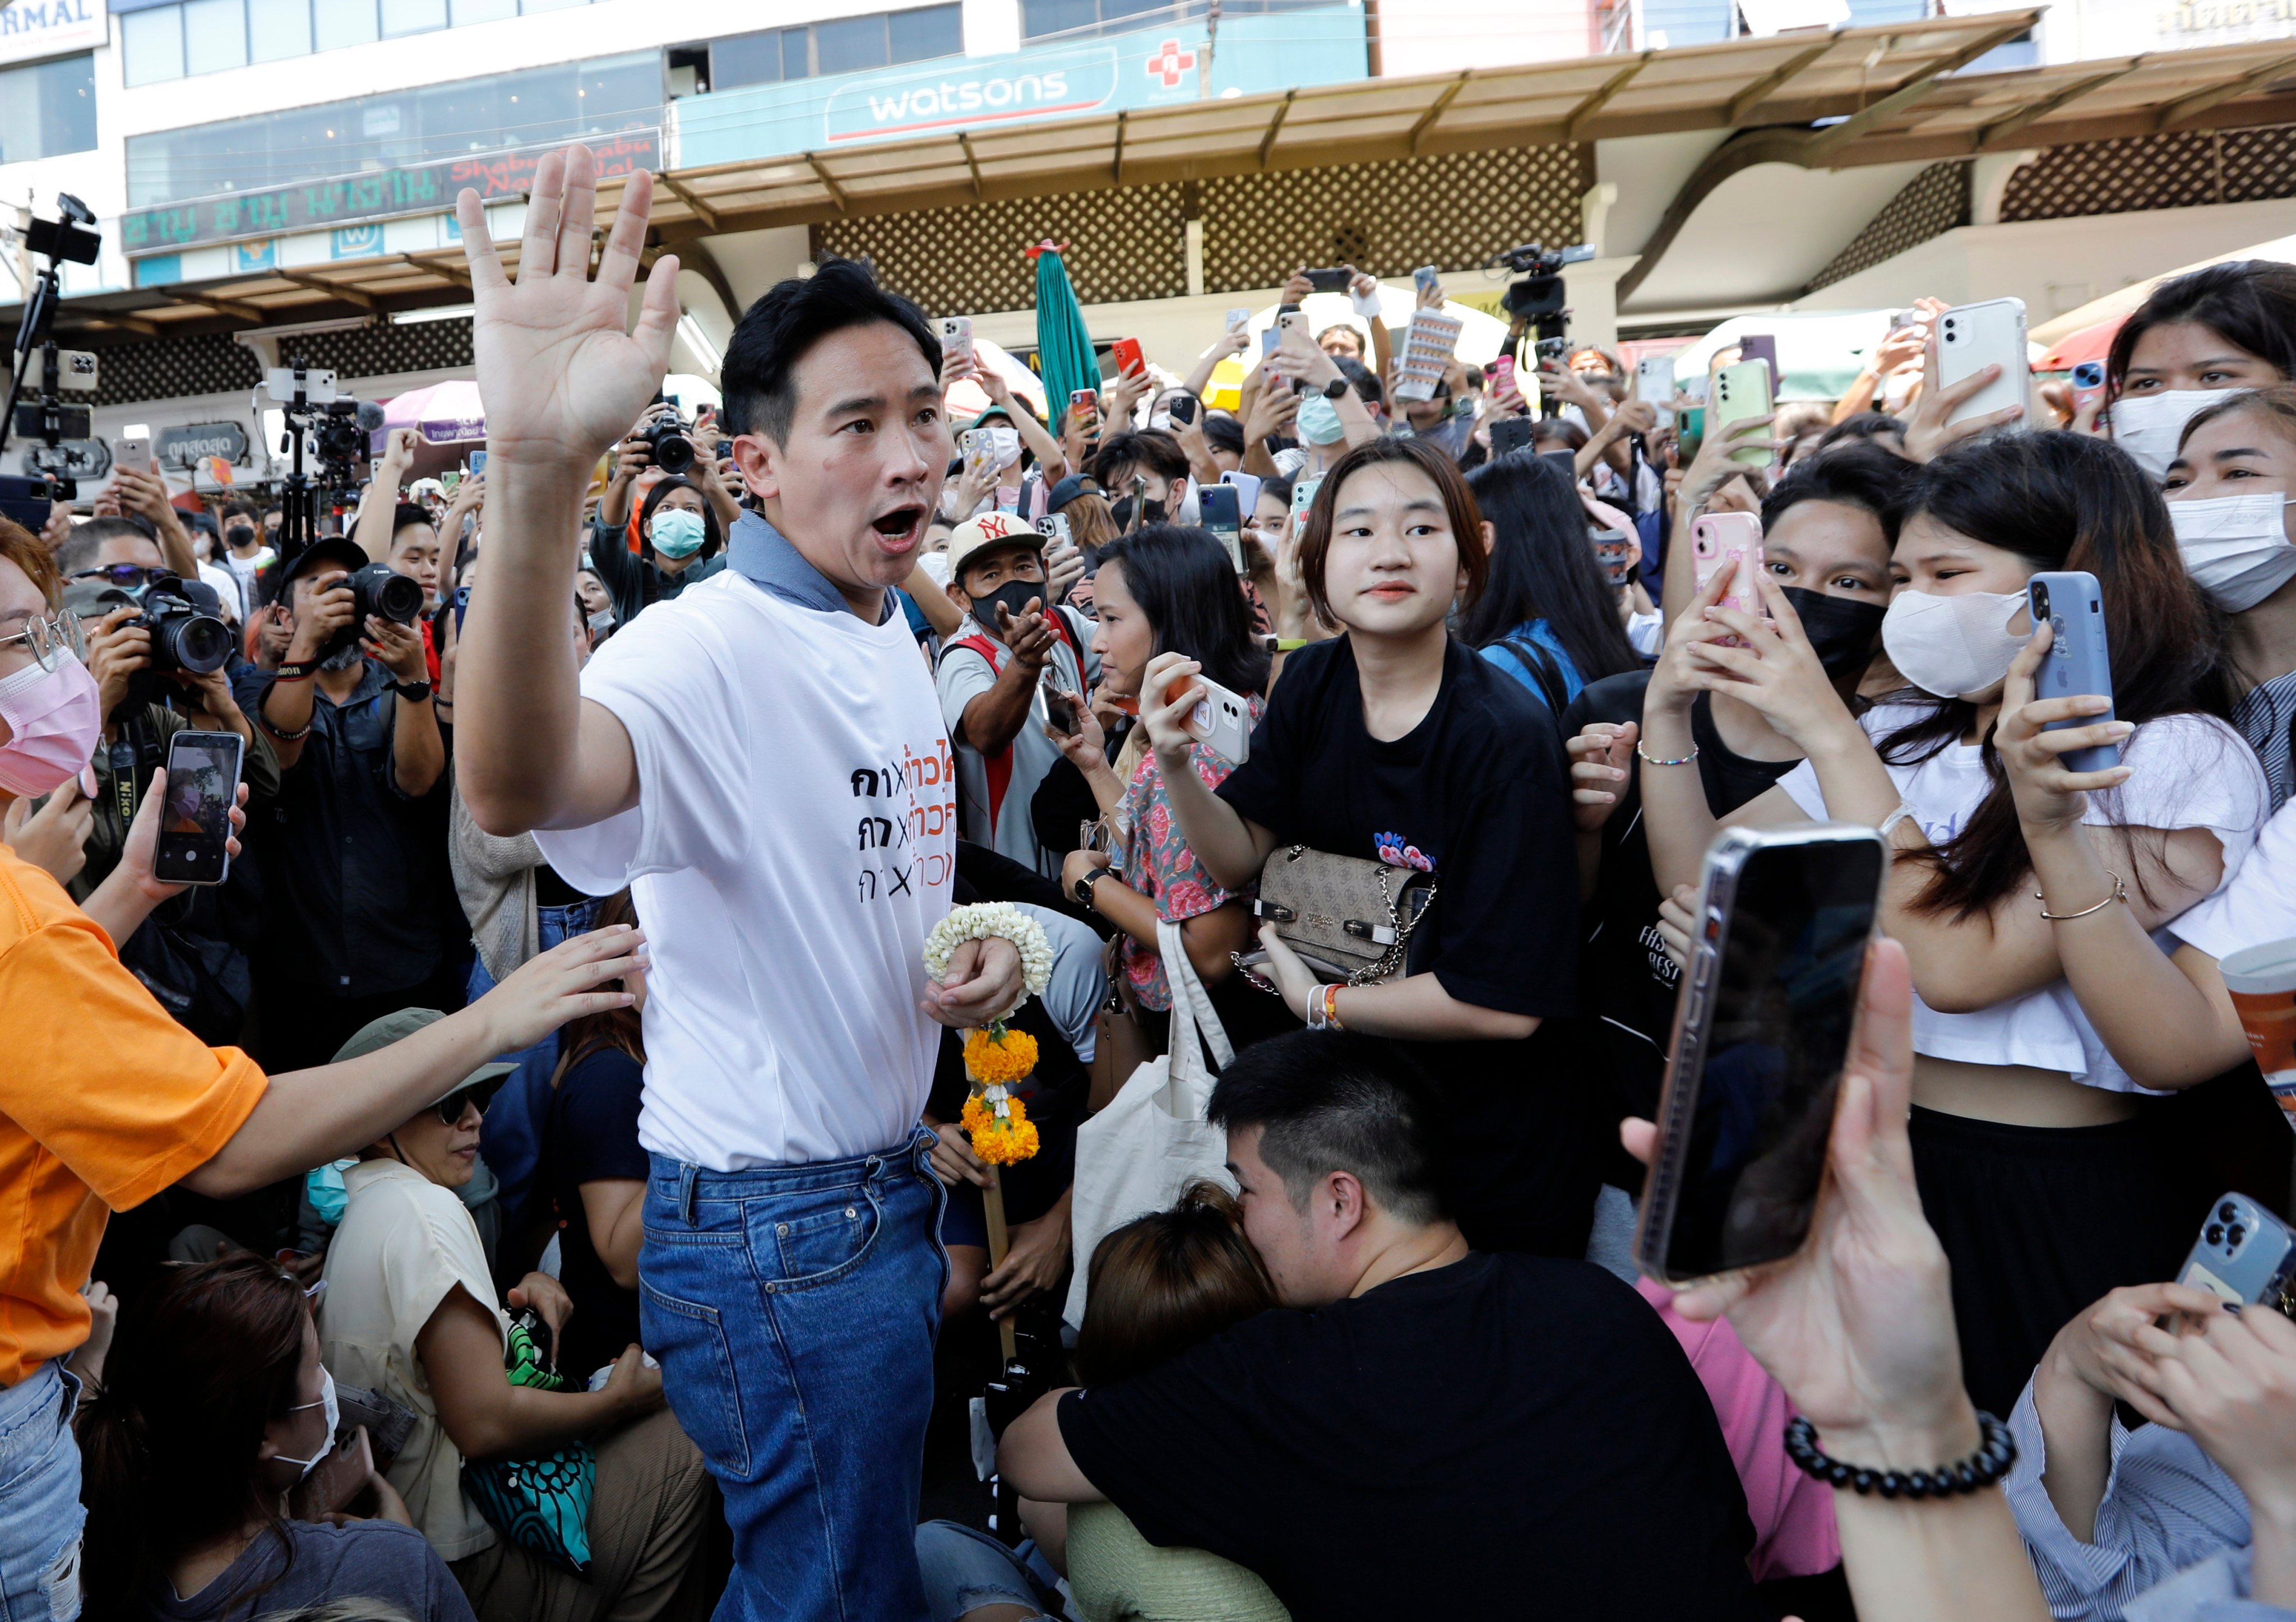 Pita Limjaroenrat (left), the Move Forward Party’s candidate for prime minister, greets supporters during a general election campaign in Bangkok, Thailand, on May 4, 2023. Photo: EPA-EFE